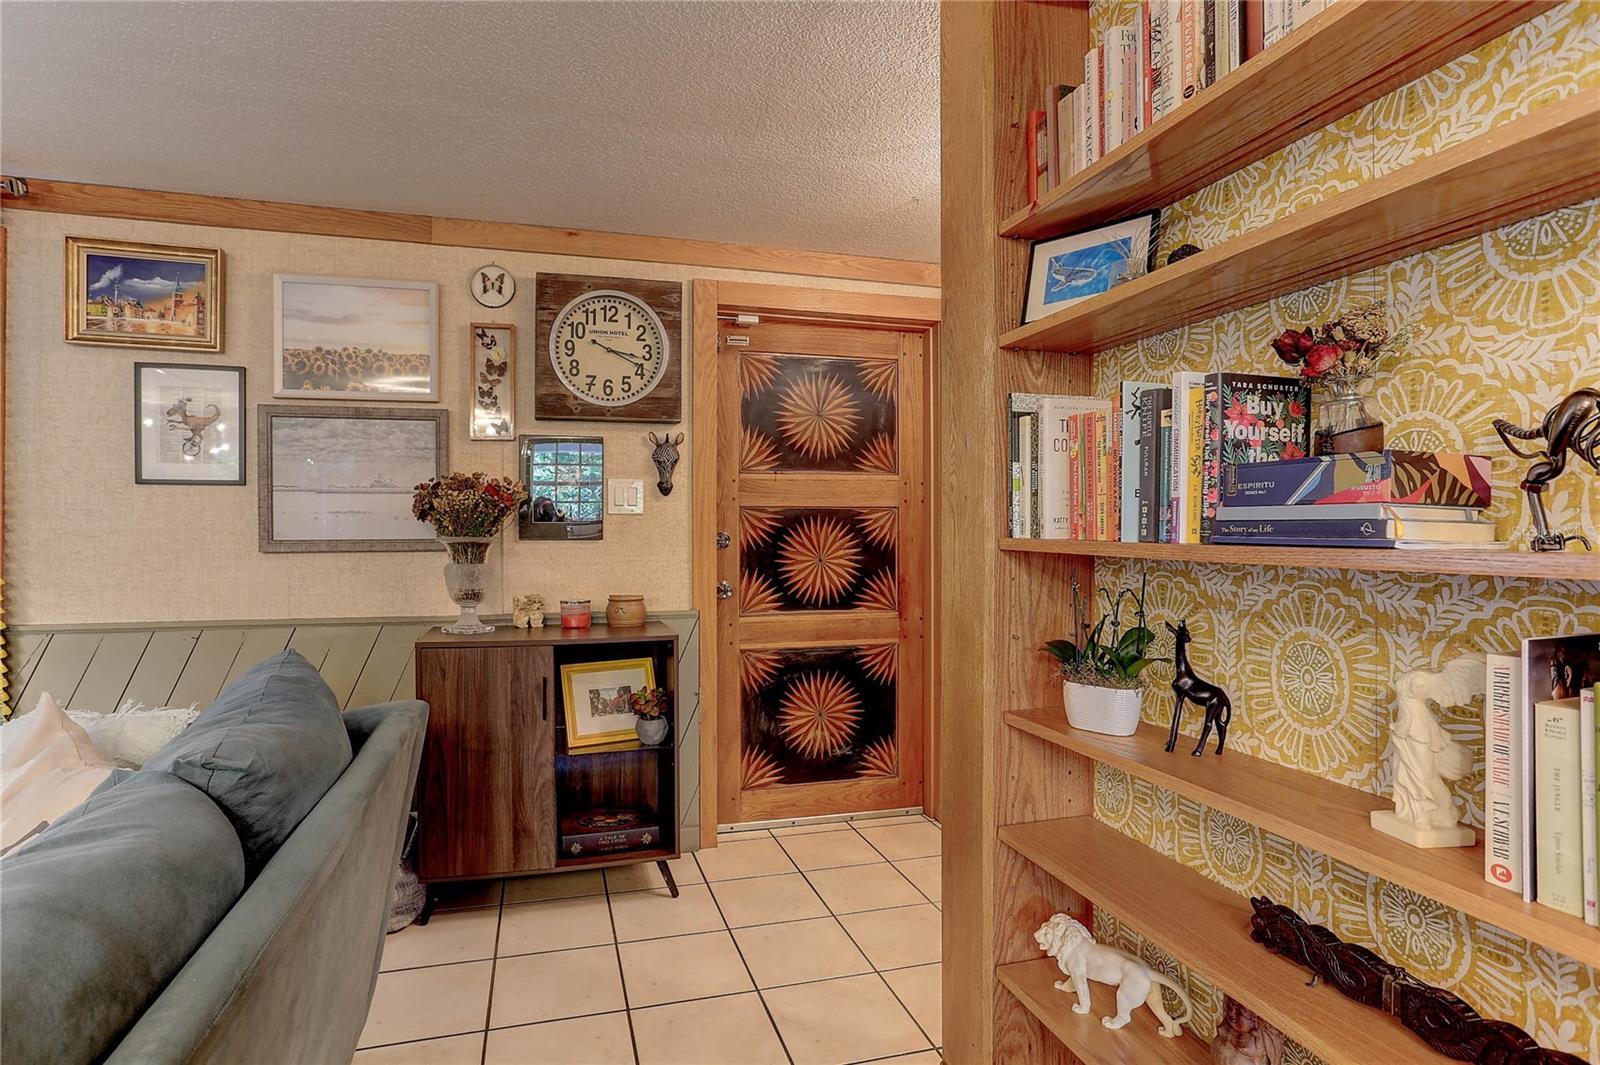 Built in bookcase in entry